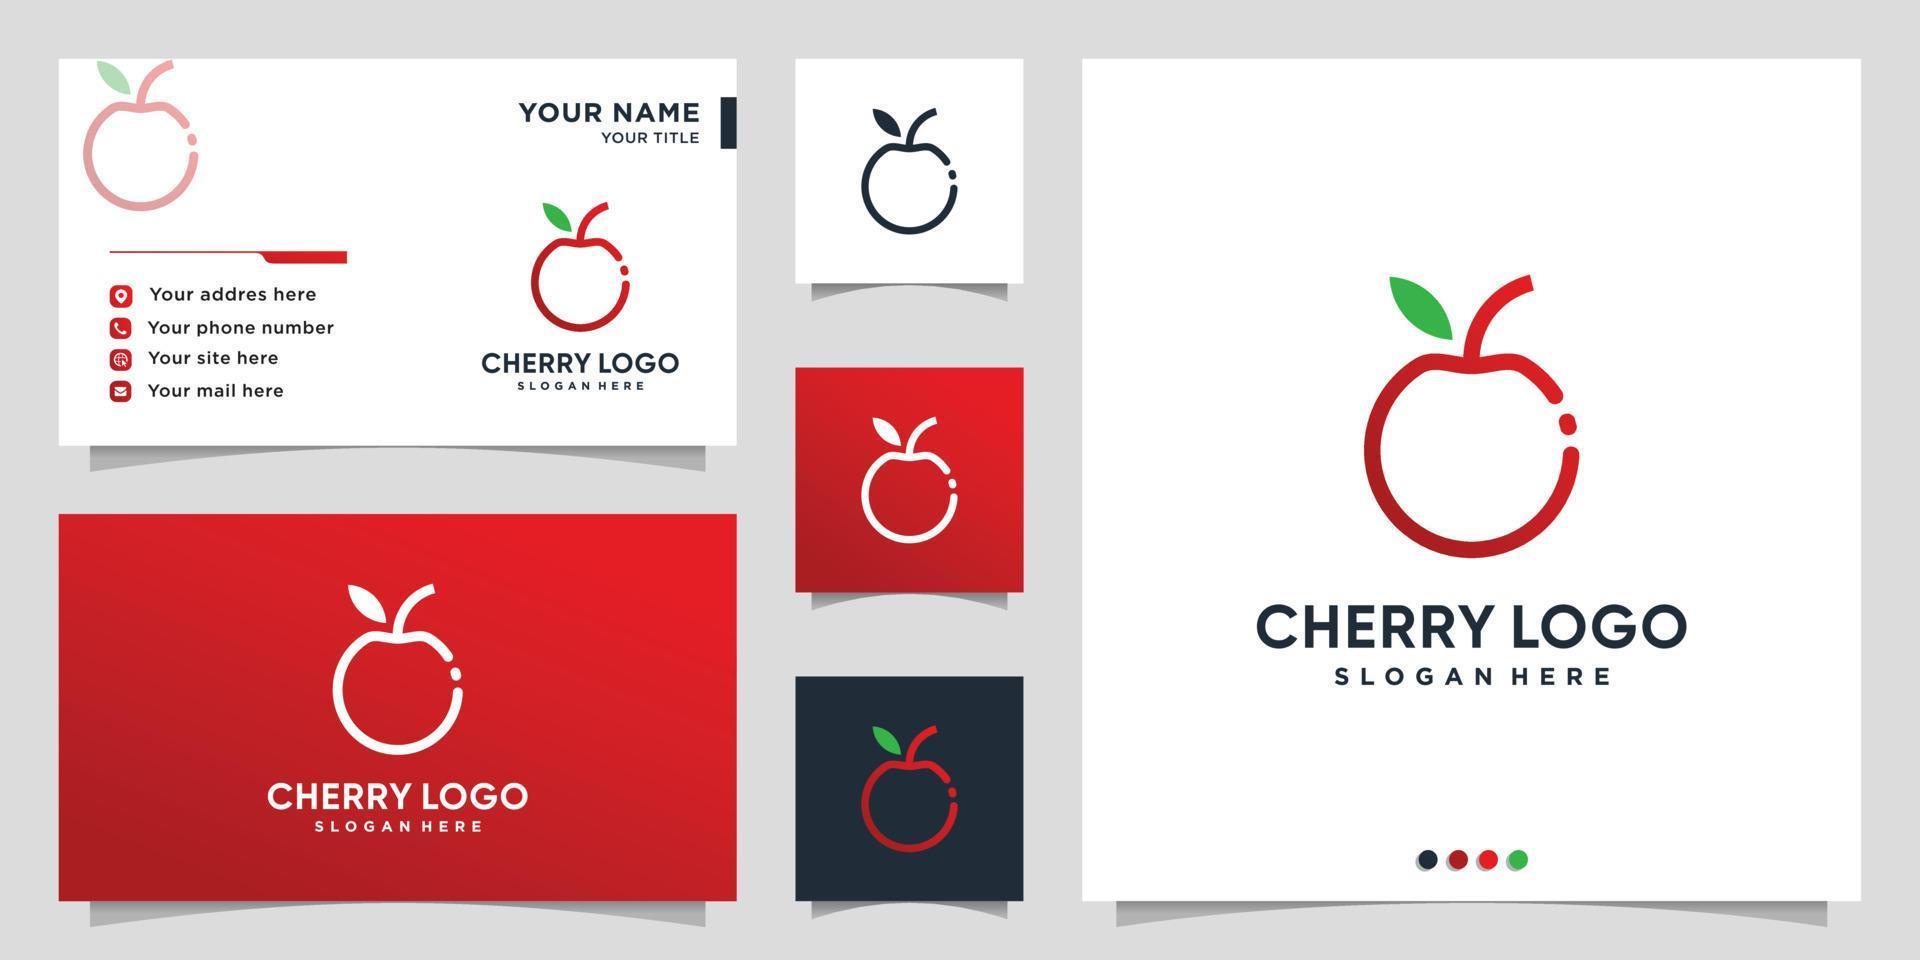 Cherry logo with gradient line art style and business card design Premium Vector